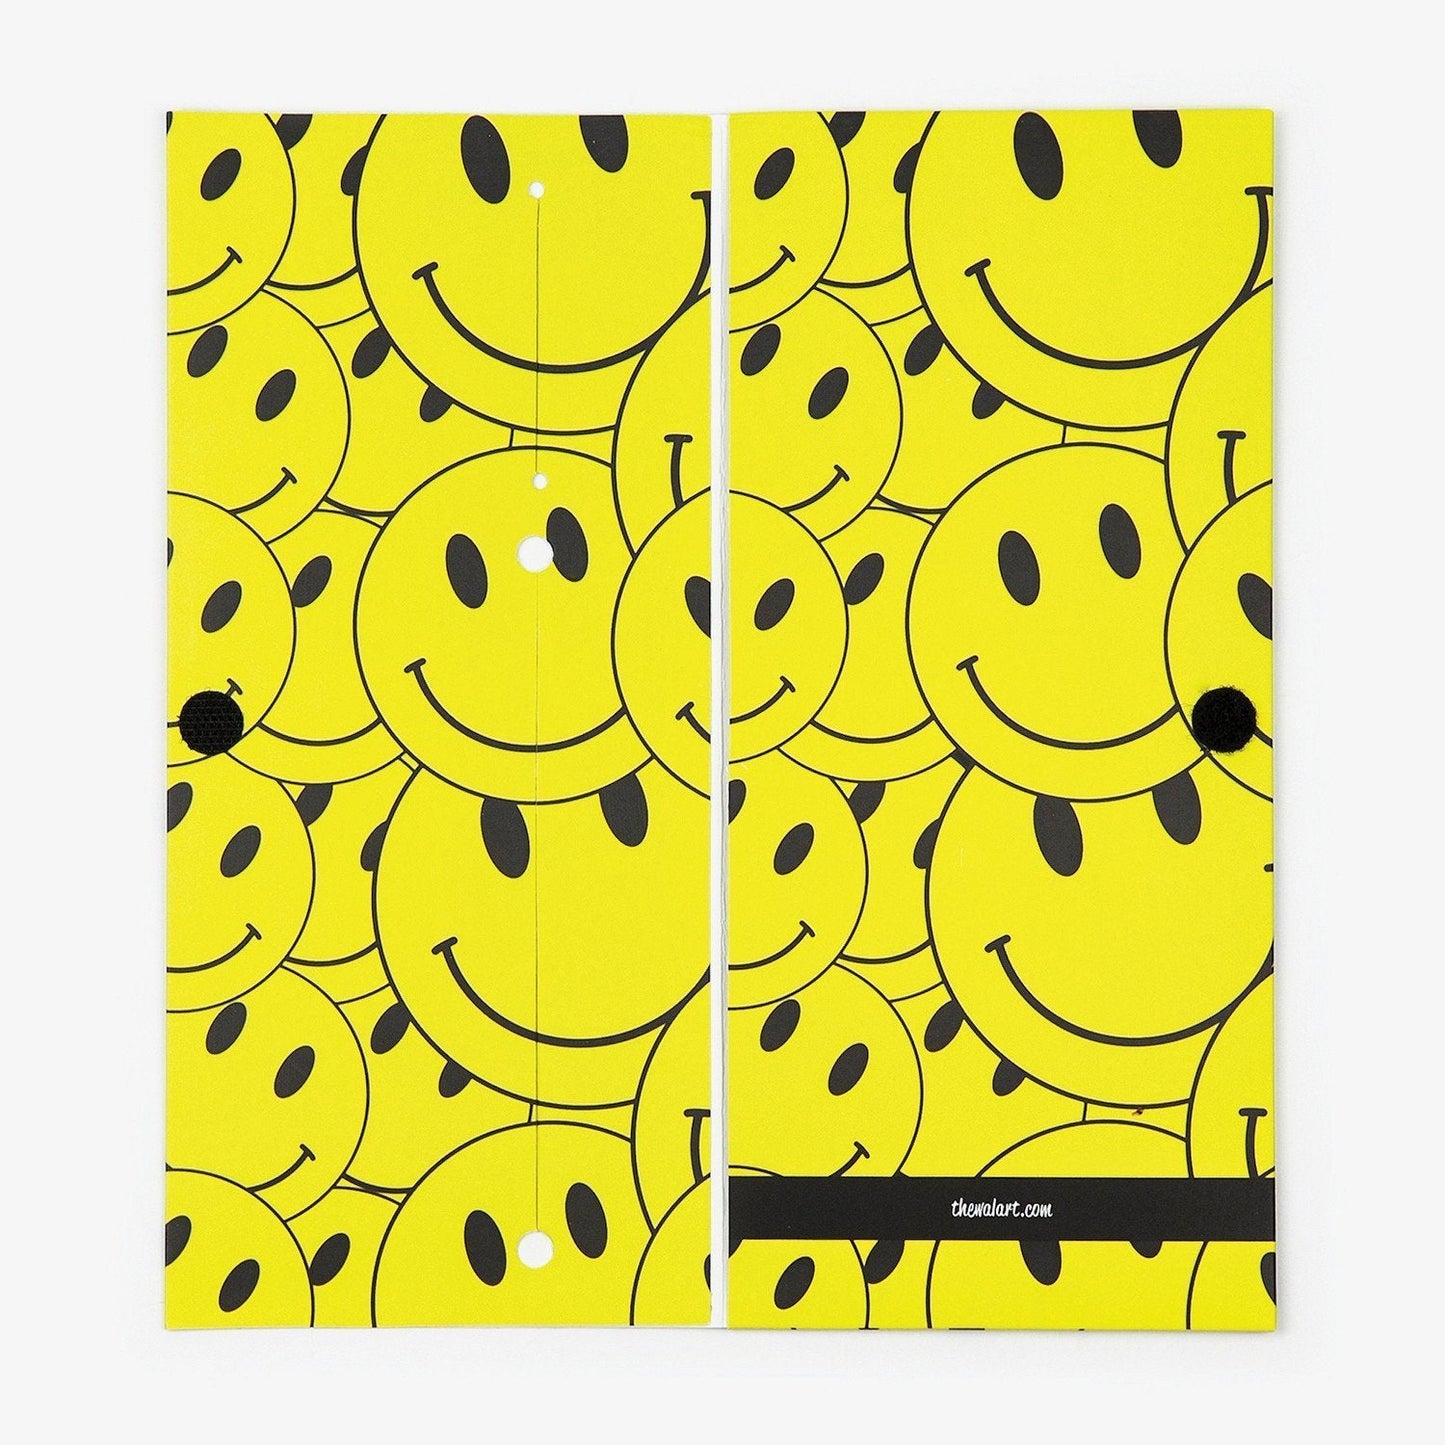 Smiley Travel Wallet - The Walart - Paper Wallet